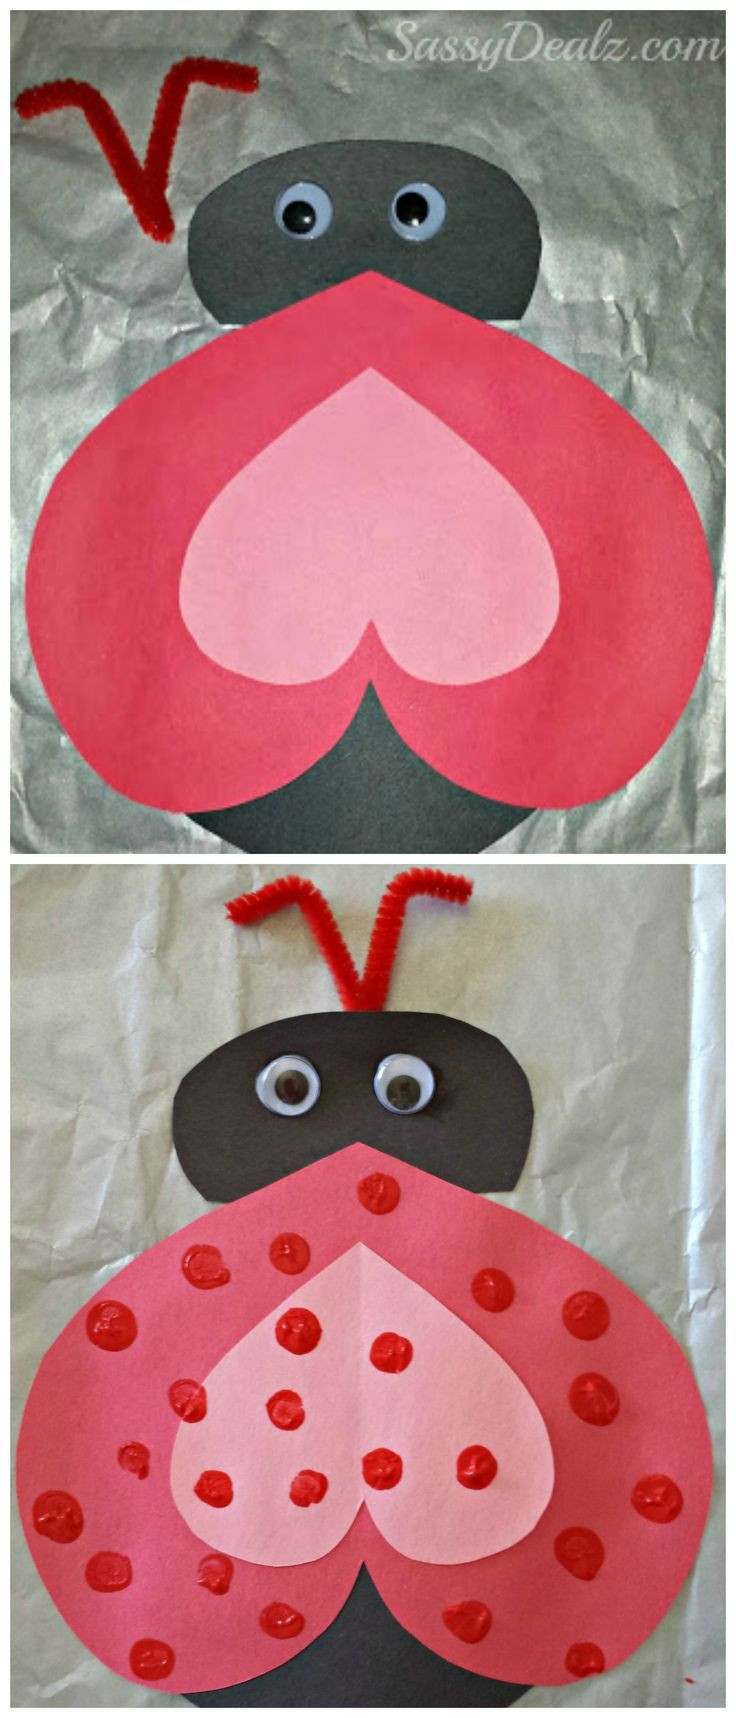 Valentines Art And Craft For Kids
 Heart Ladybug Valentines Day Card Craft For Kids DIY